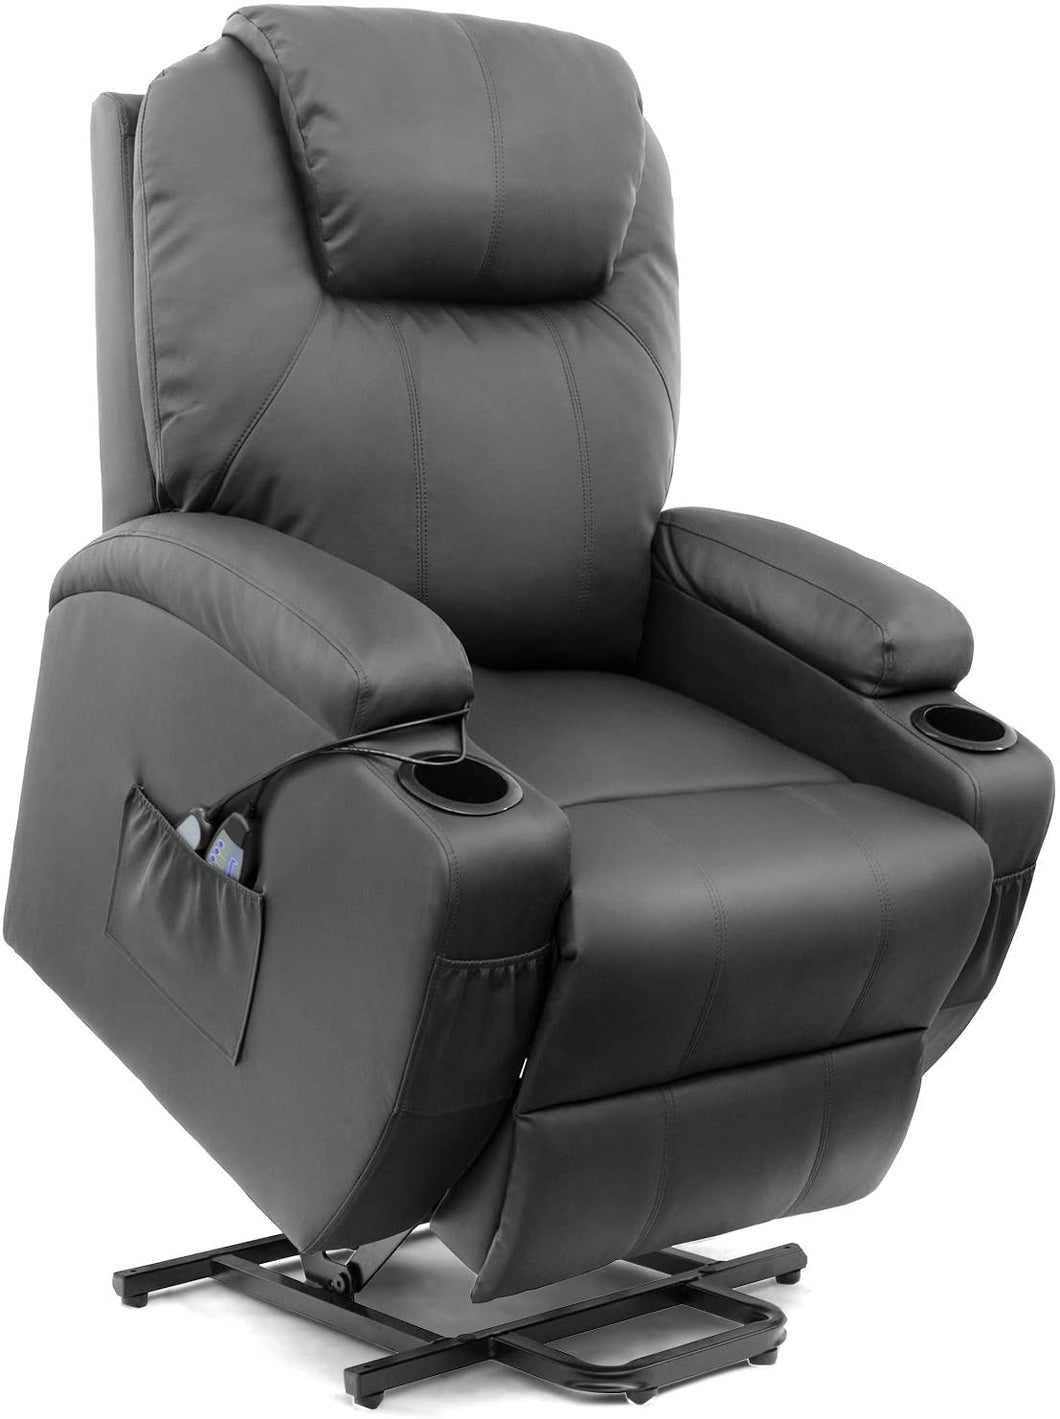 Power Lift Recliner Chair with Massage and Heat for Elderly, PU Leather Heated Vibrating, with Cup Holders, Side Pouch, Remote Control, for Home Theater, Power Theater Chair(Gray)